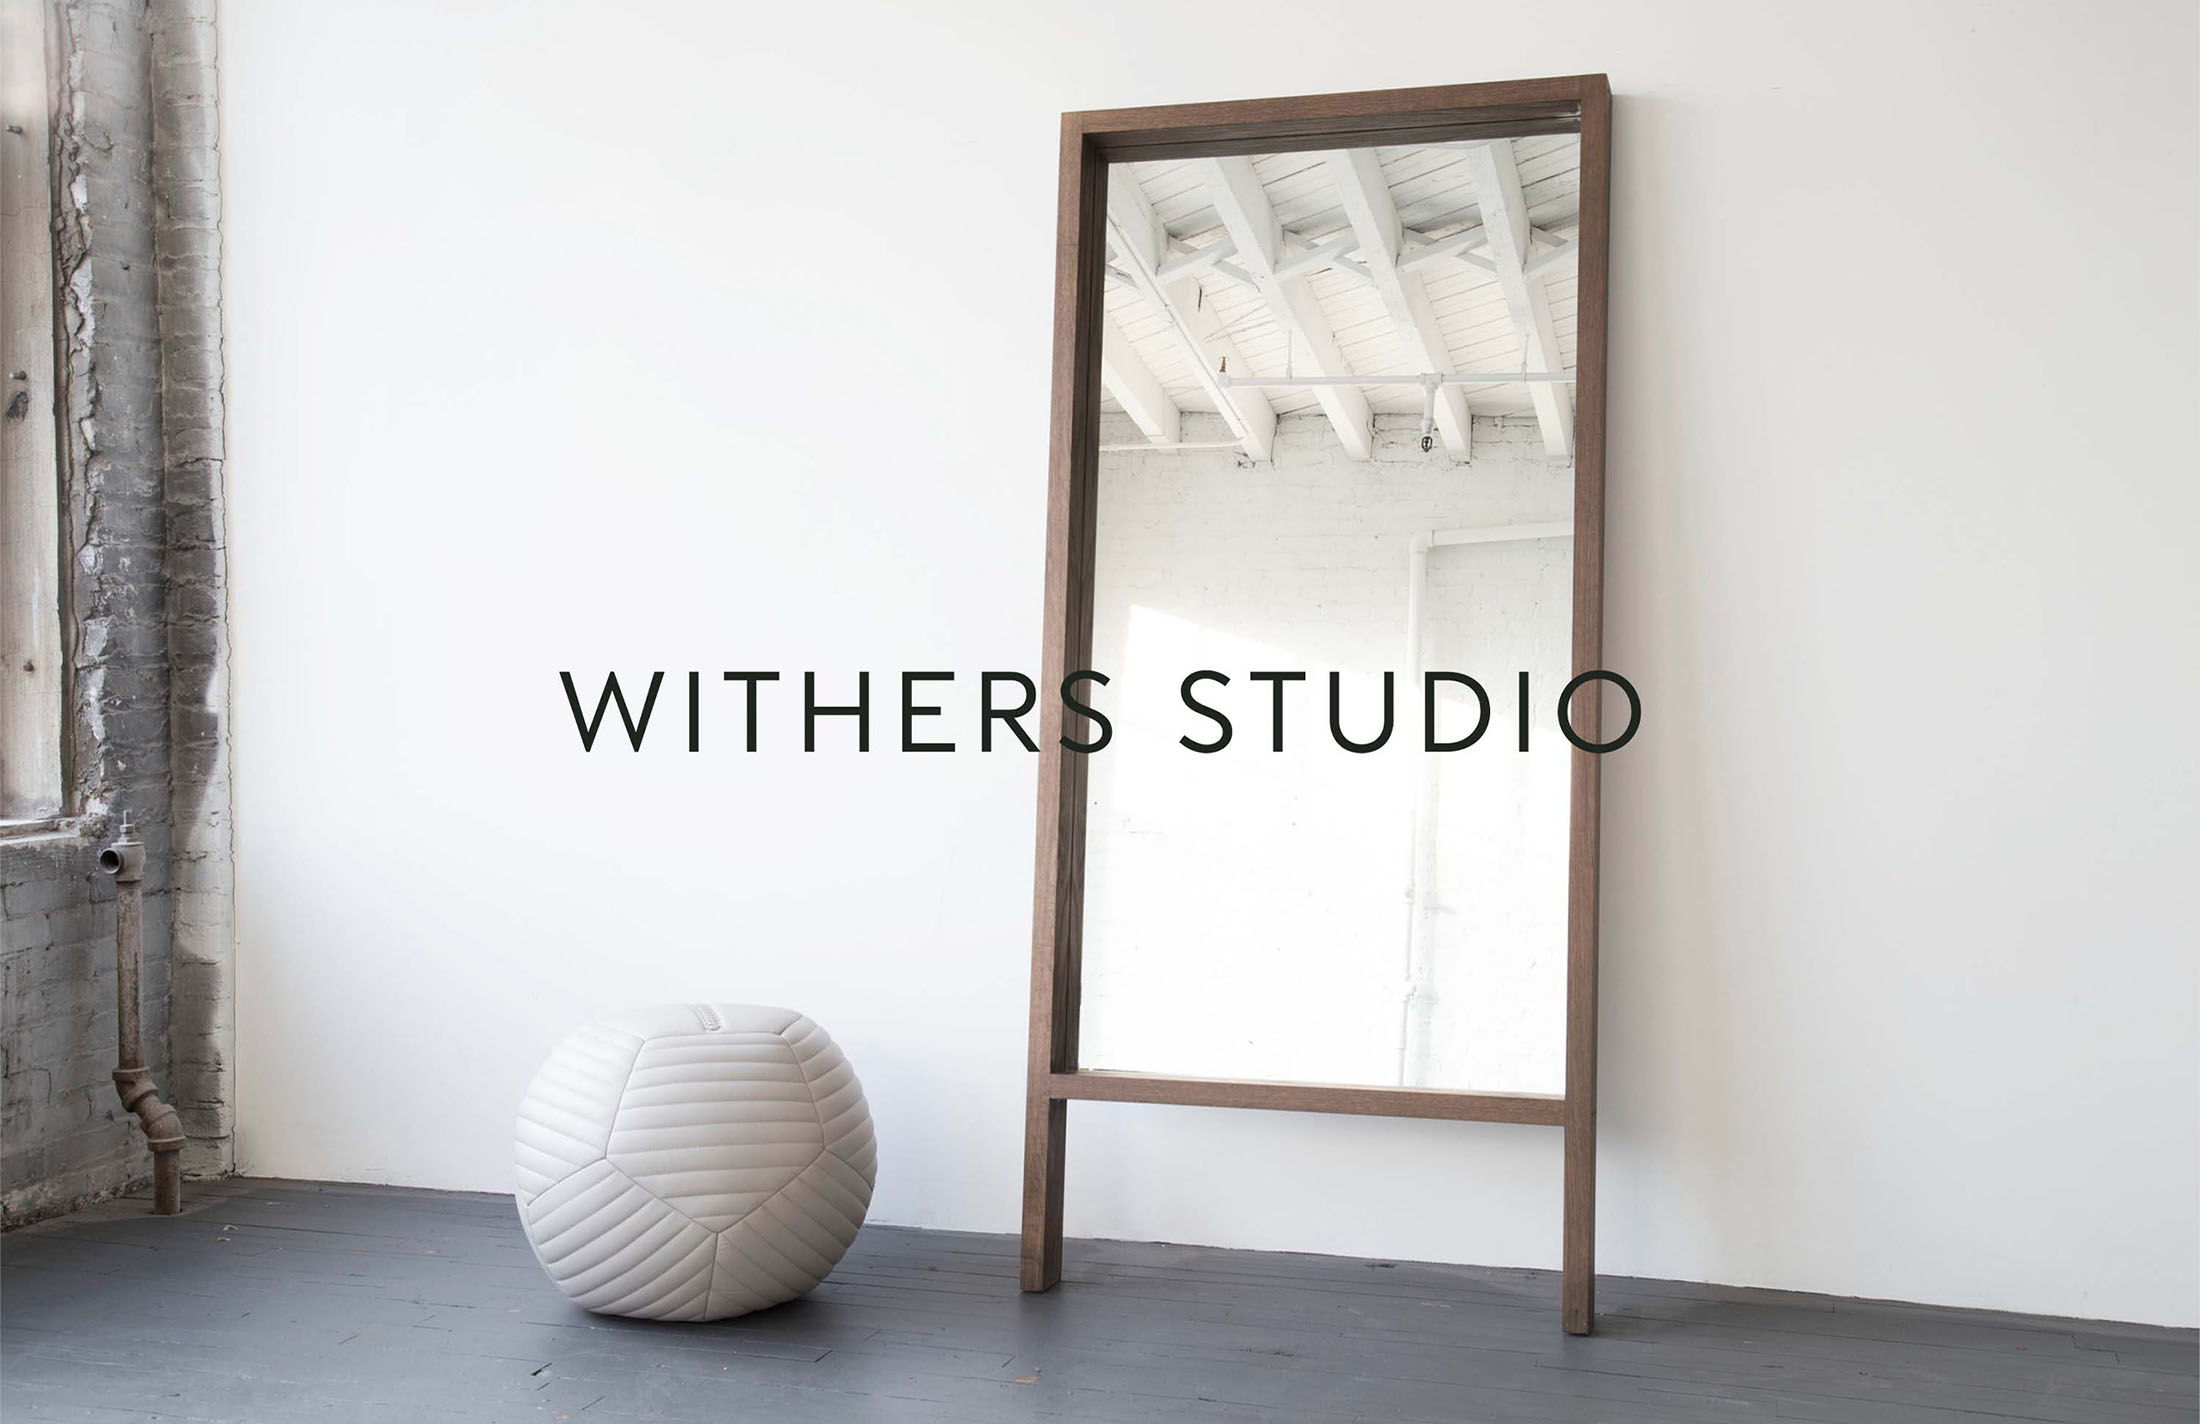 Primary Logo - Withers Studio - Whiskey and Red Small Business Branding and Website Design Packages